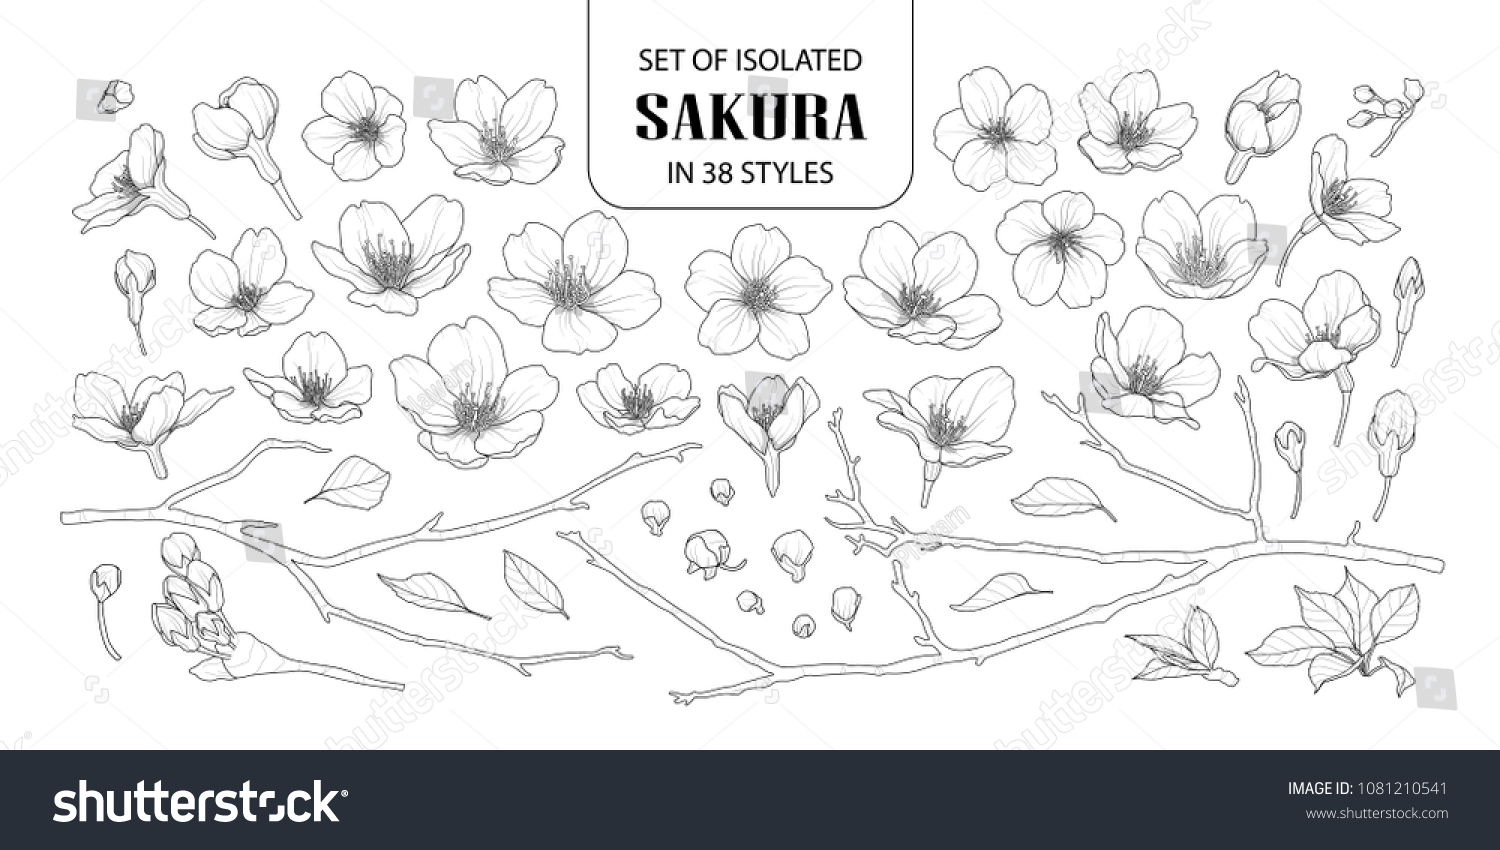 Set of isolated sakura in 38 styles. Cute hand drawn flower vector illustration in black outline and white plane on white background.